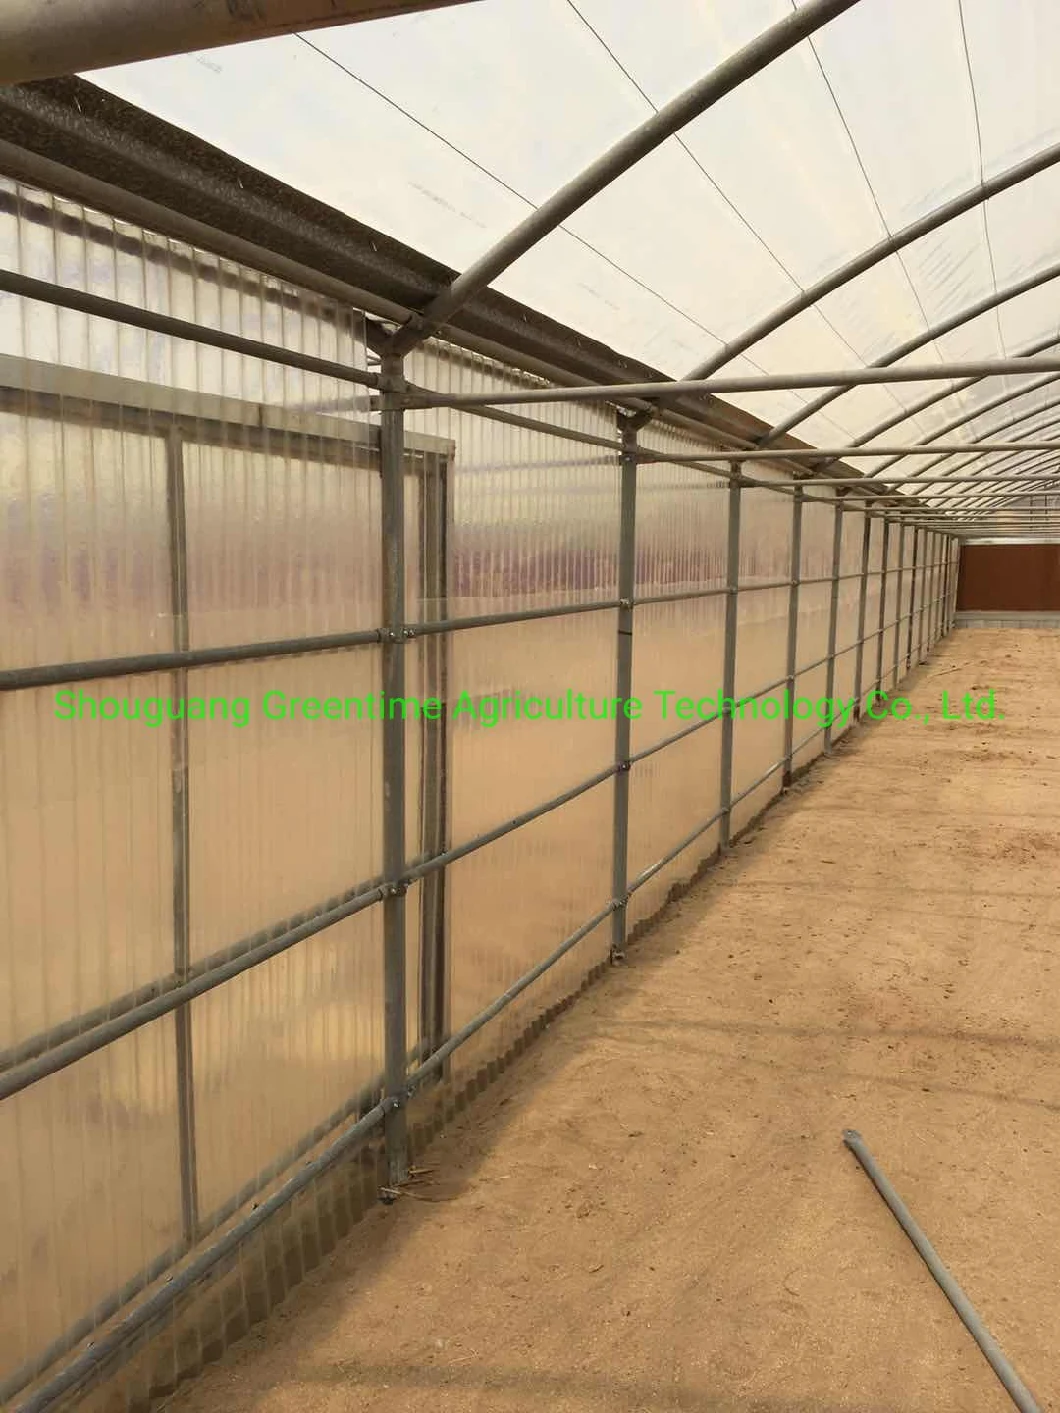 Round Type Polycarbonate Plastic PC Greenhouse for Vegetables/Flowers/Tomato/Cucumber Cultivation with Outside Shading System